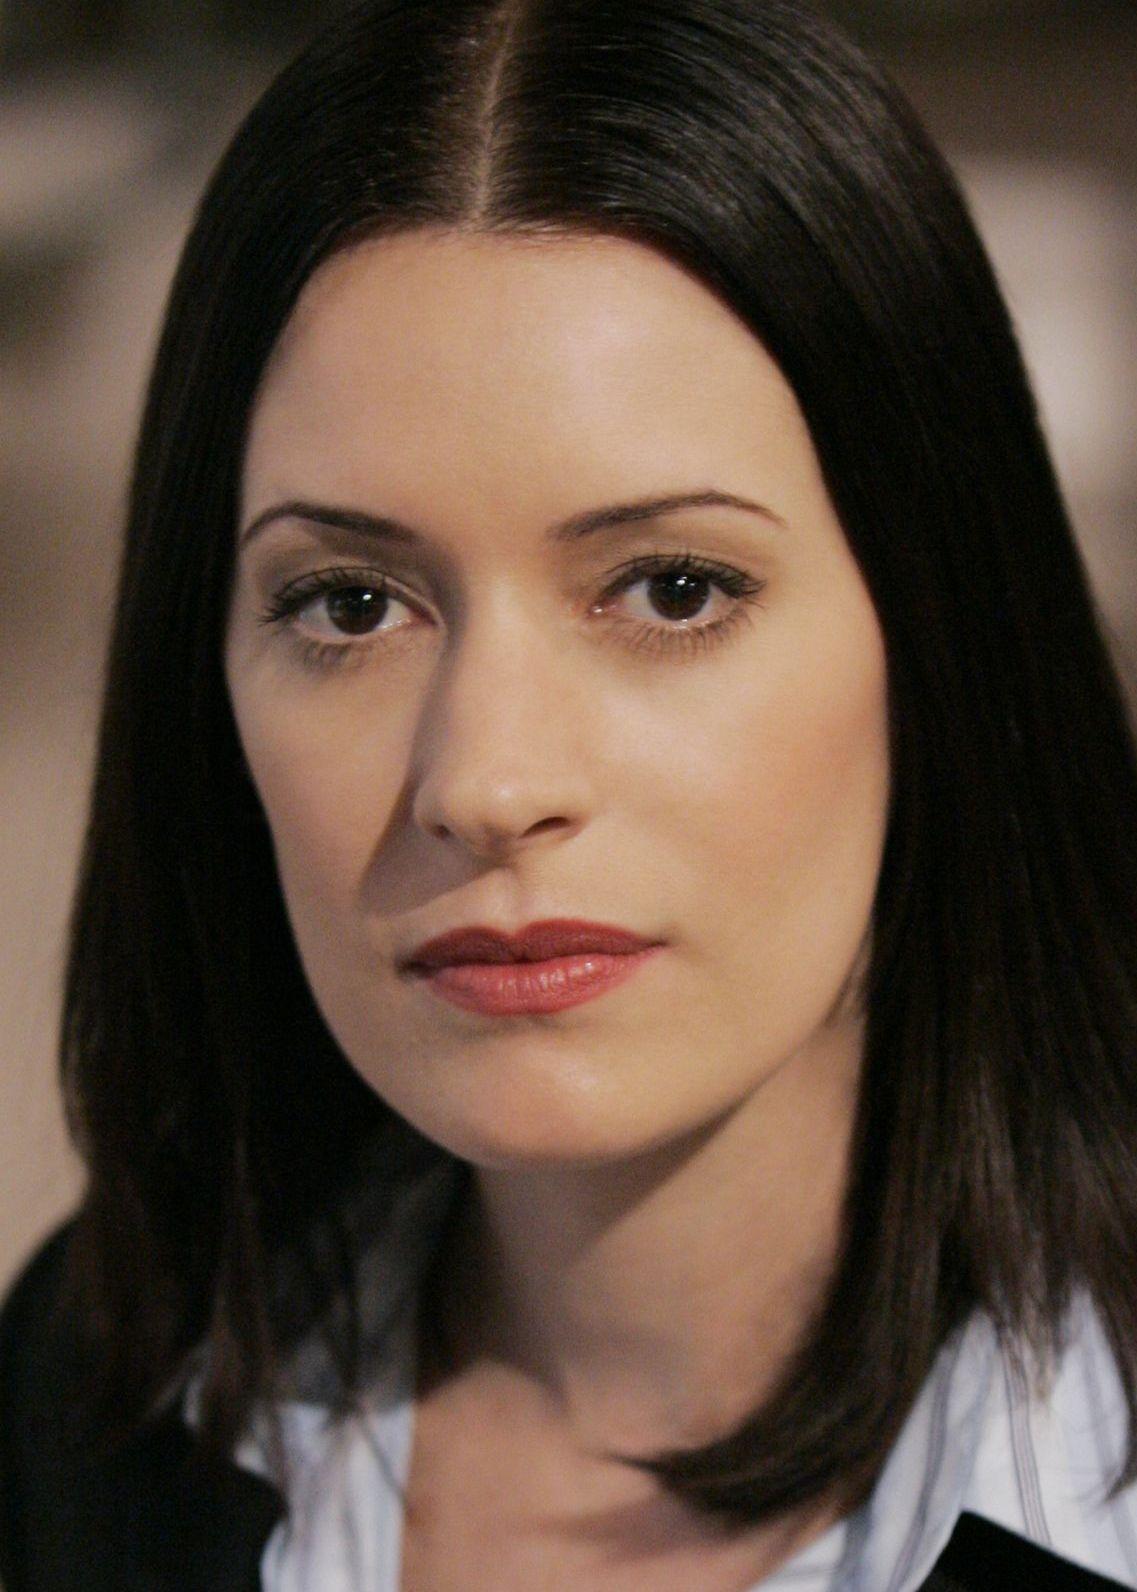 70+ Hot Pictures Of Paget Brewster From Criminal Minds Will Brighten Up Your Day 34